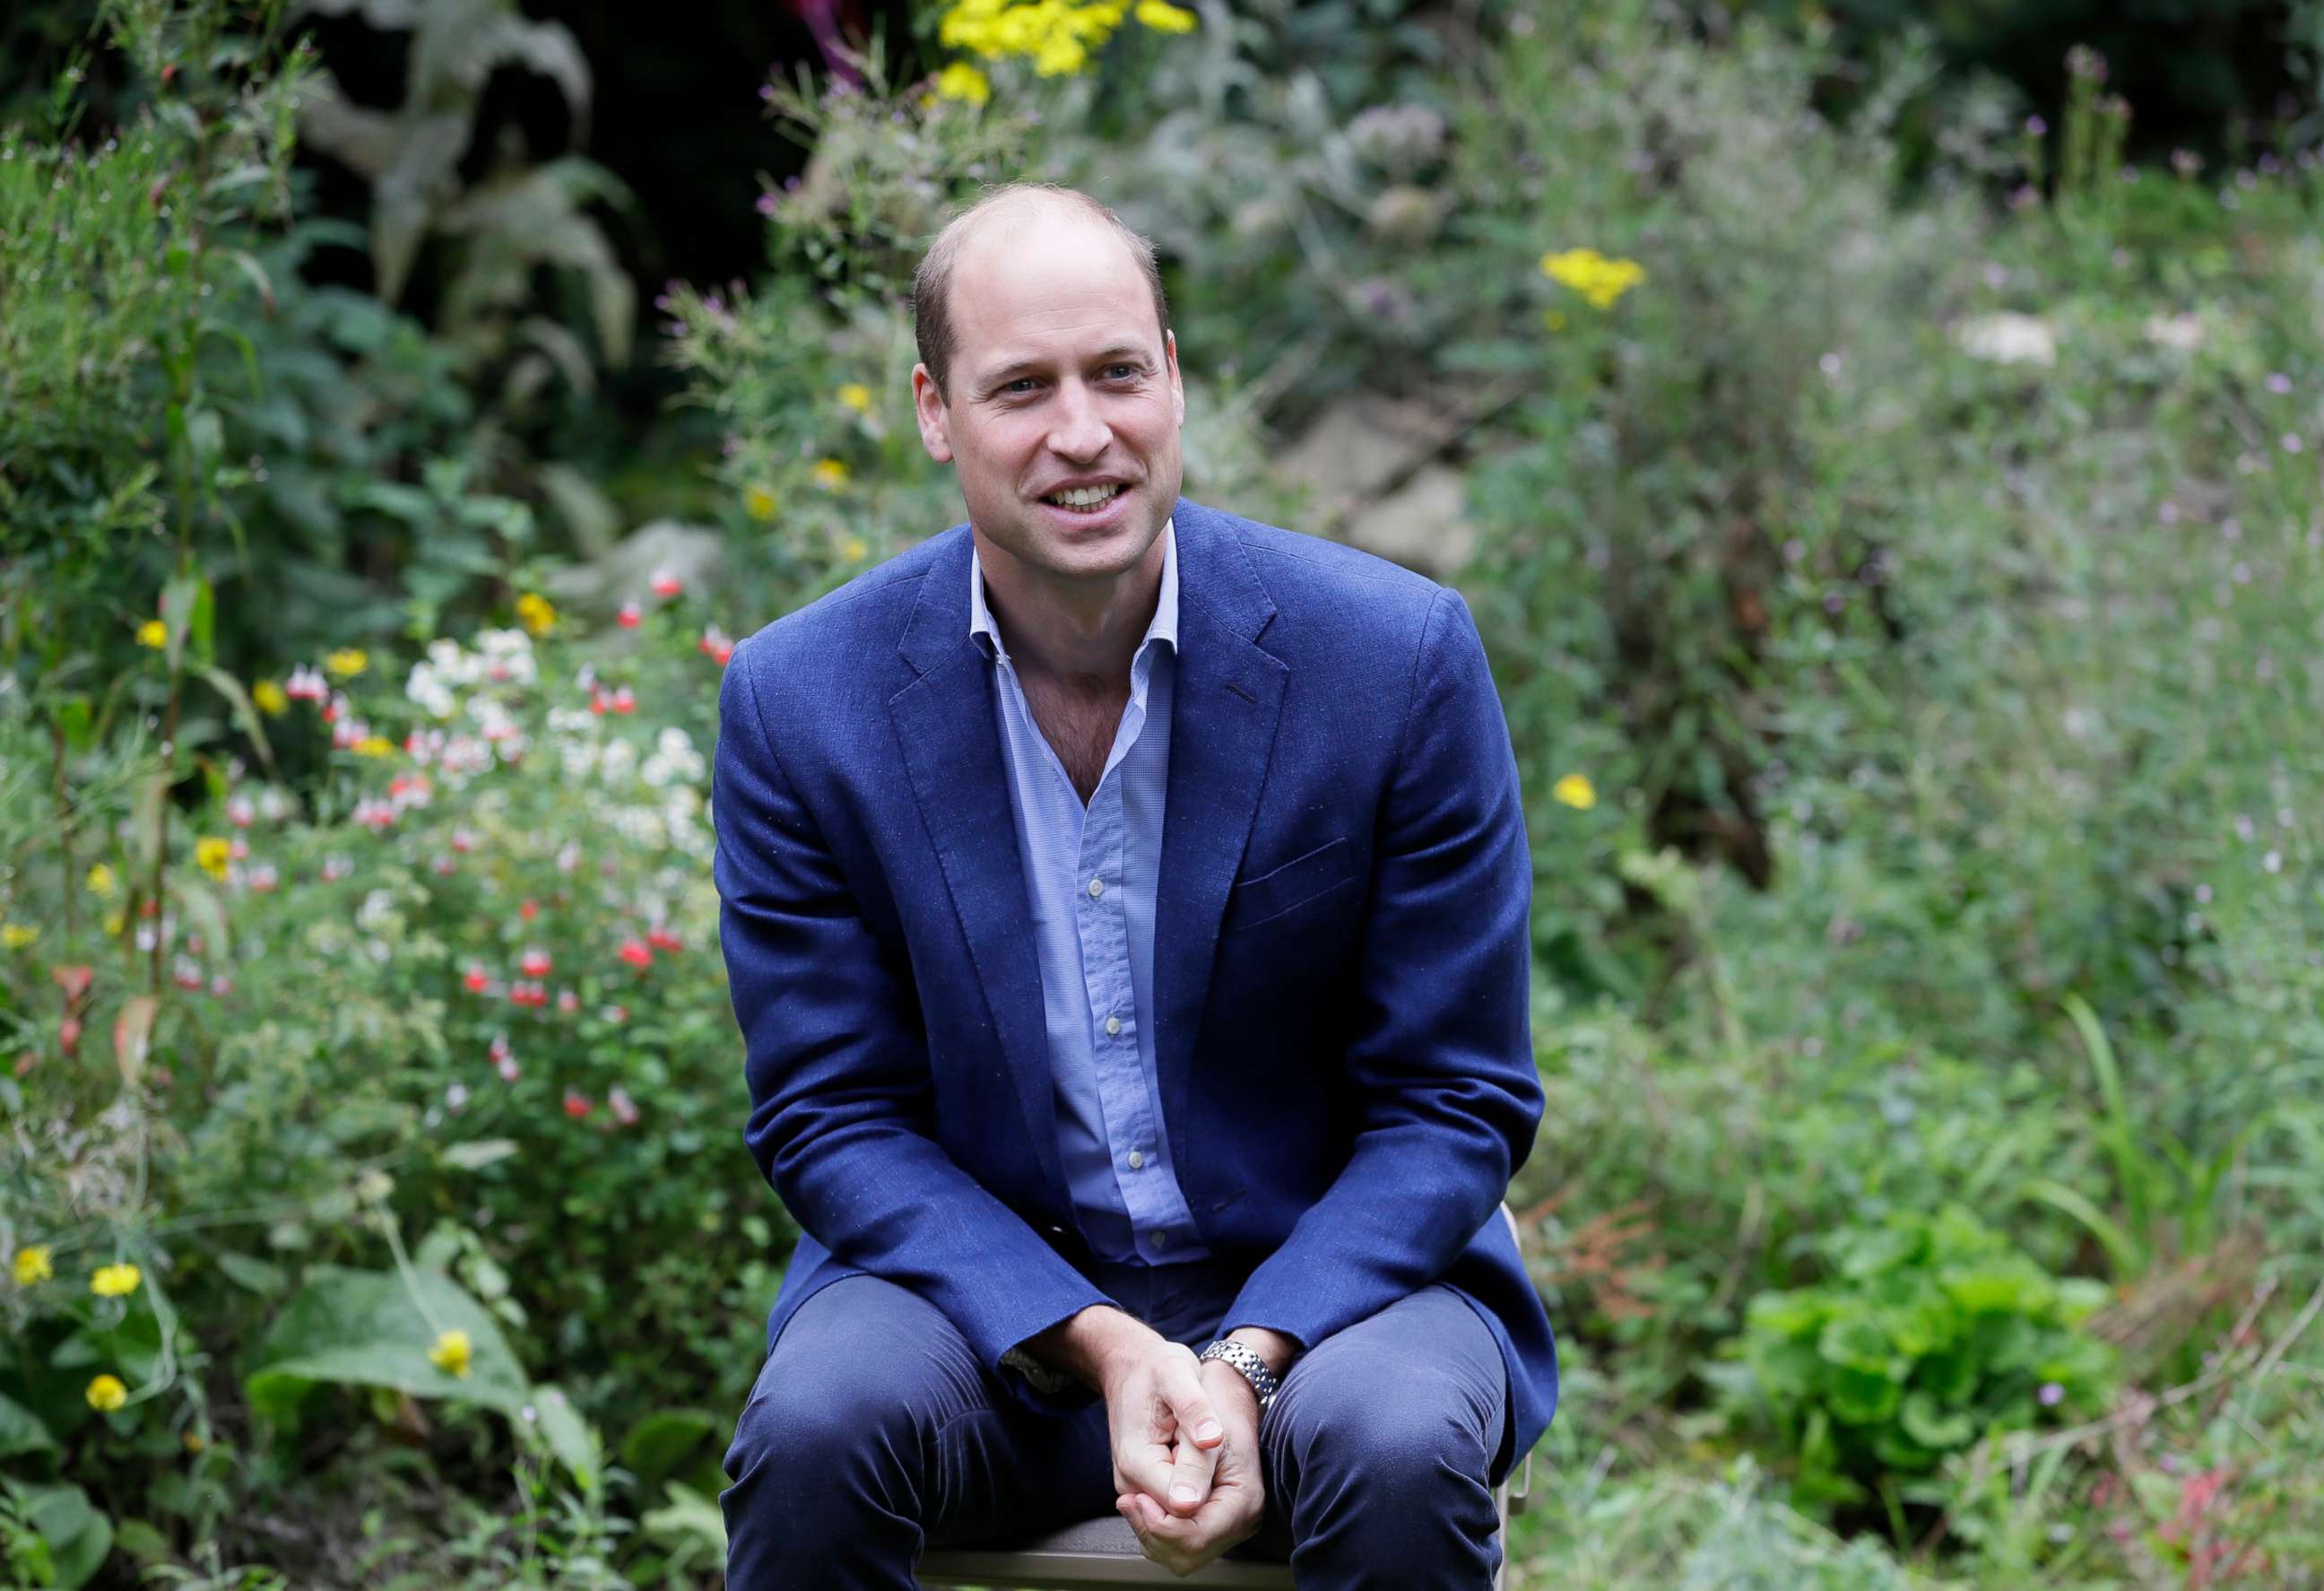 PHOTO: In this July 16, 2020, file photo, Britain's Prince William, Duke of Cambridge socially distances as he speaks at an event in Peterborough, U.K.